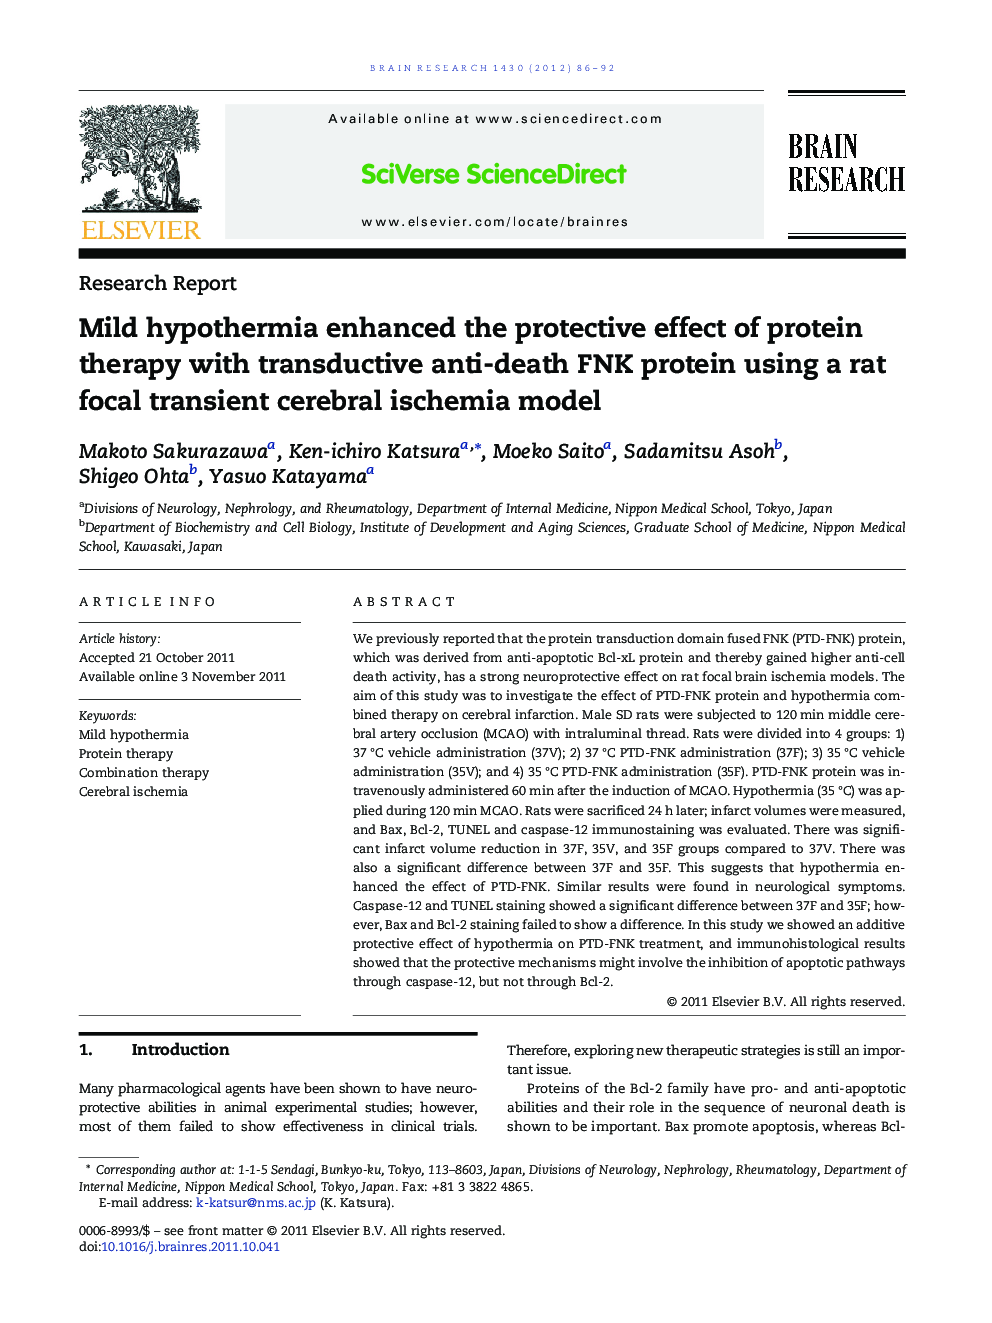 Research ReportMild hypothermia enhanced the protective effect of protein therapy with transductive anti-death FNK protein using a rat focal transient cerebral ischemia model